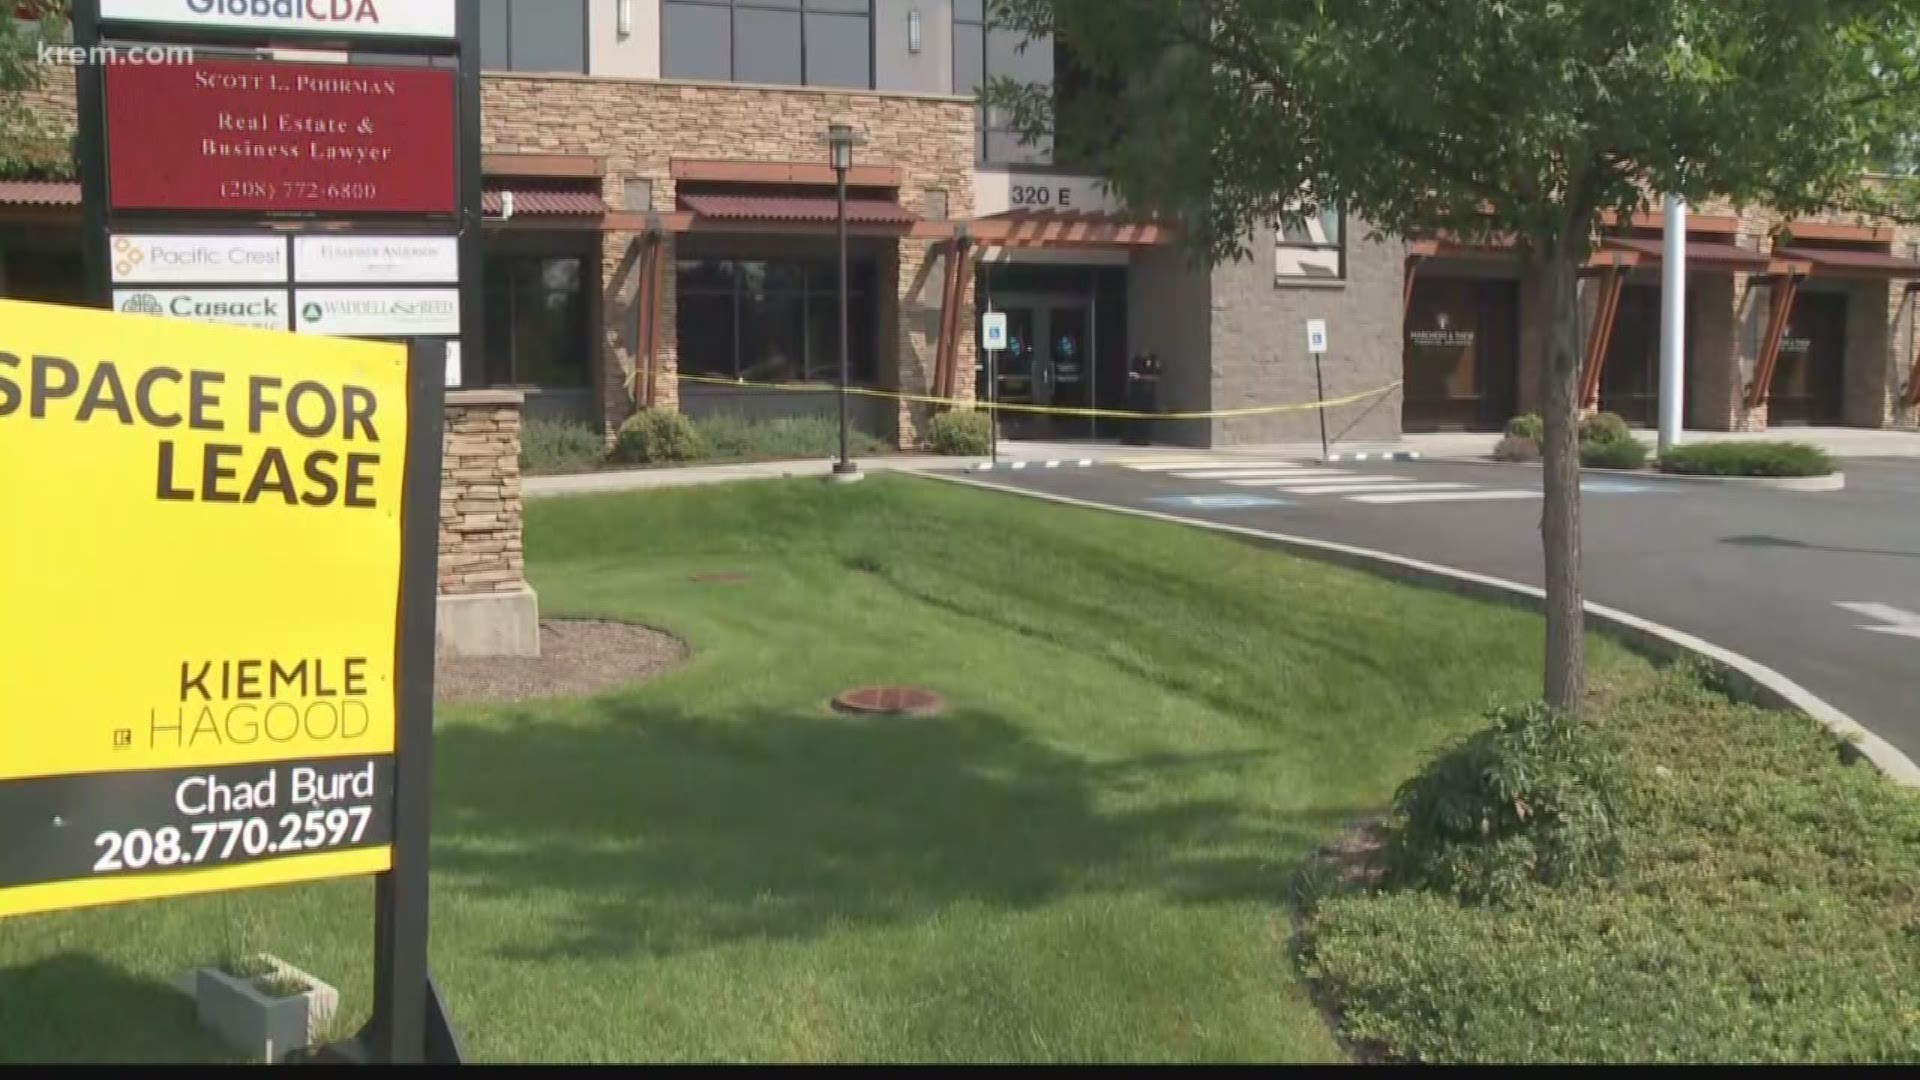 Credit union did right thing by hiring guard, says nearby employee who heard shooting (8-15-18)